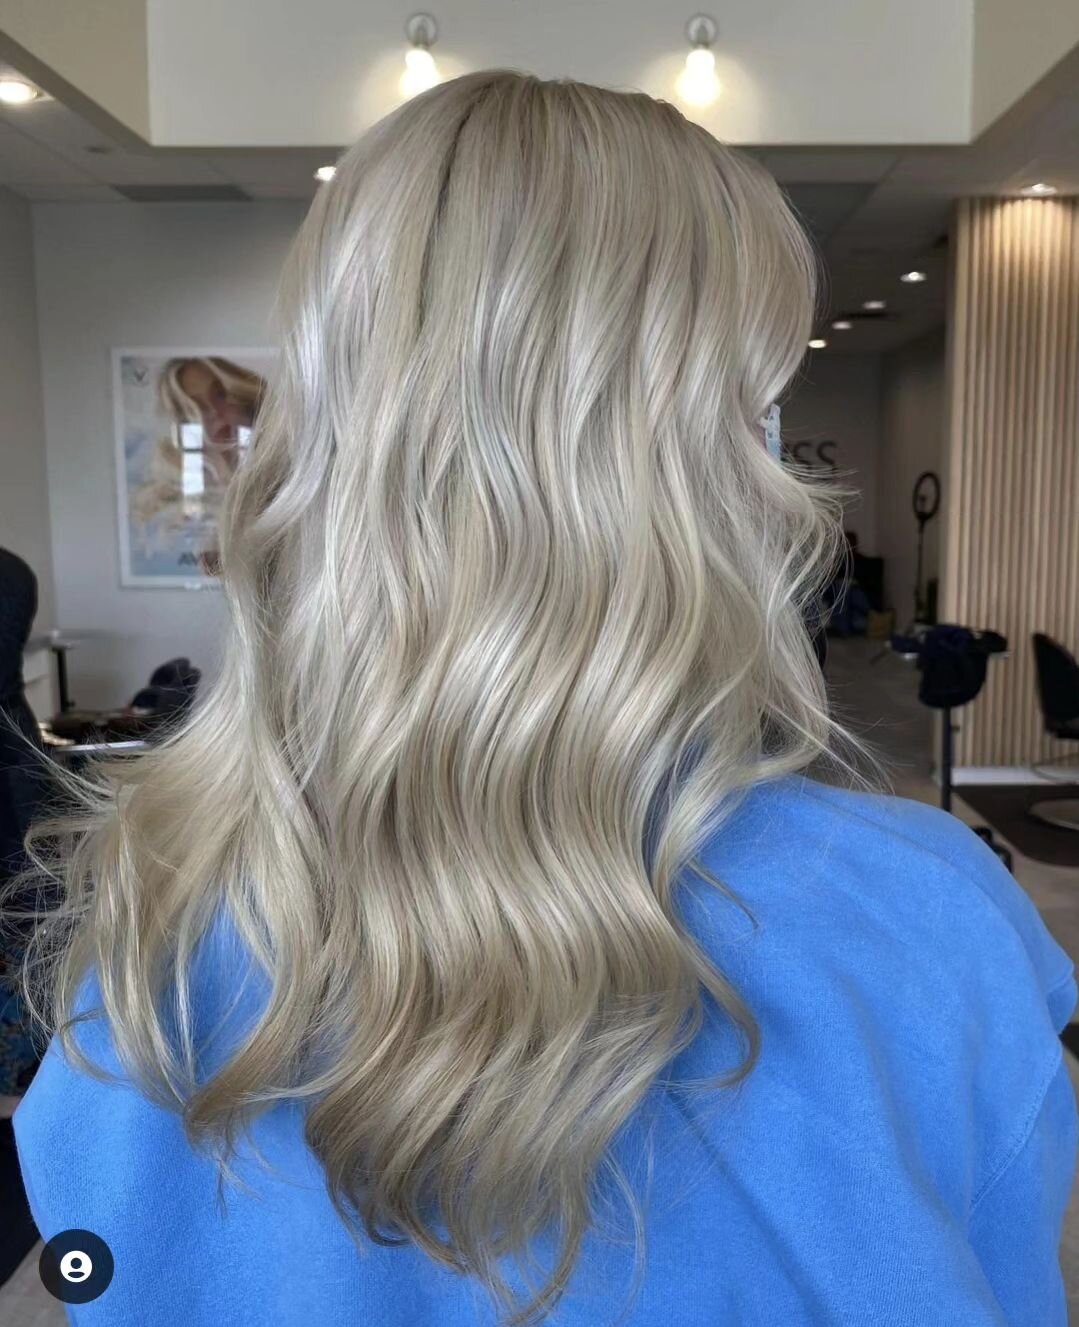 Did you hear? Our jr. Stylist, Sarah, is now booking for colour and blonding services! ⚡

Check out some of her incredible work @sarah.alexandra.hair 🪮🖤